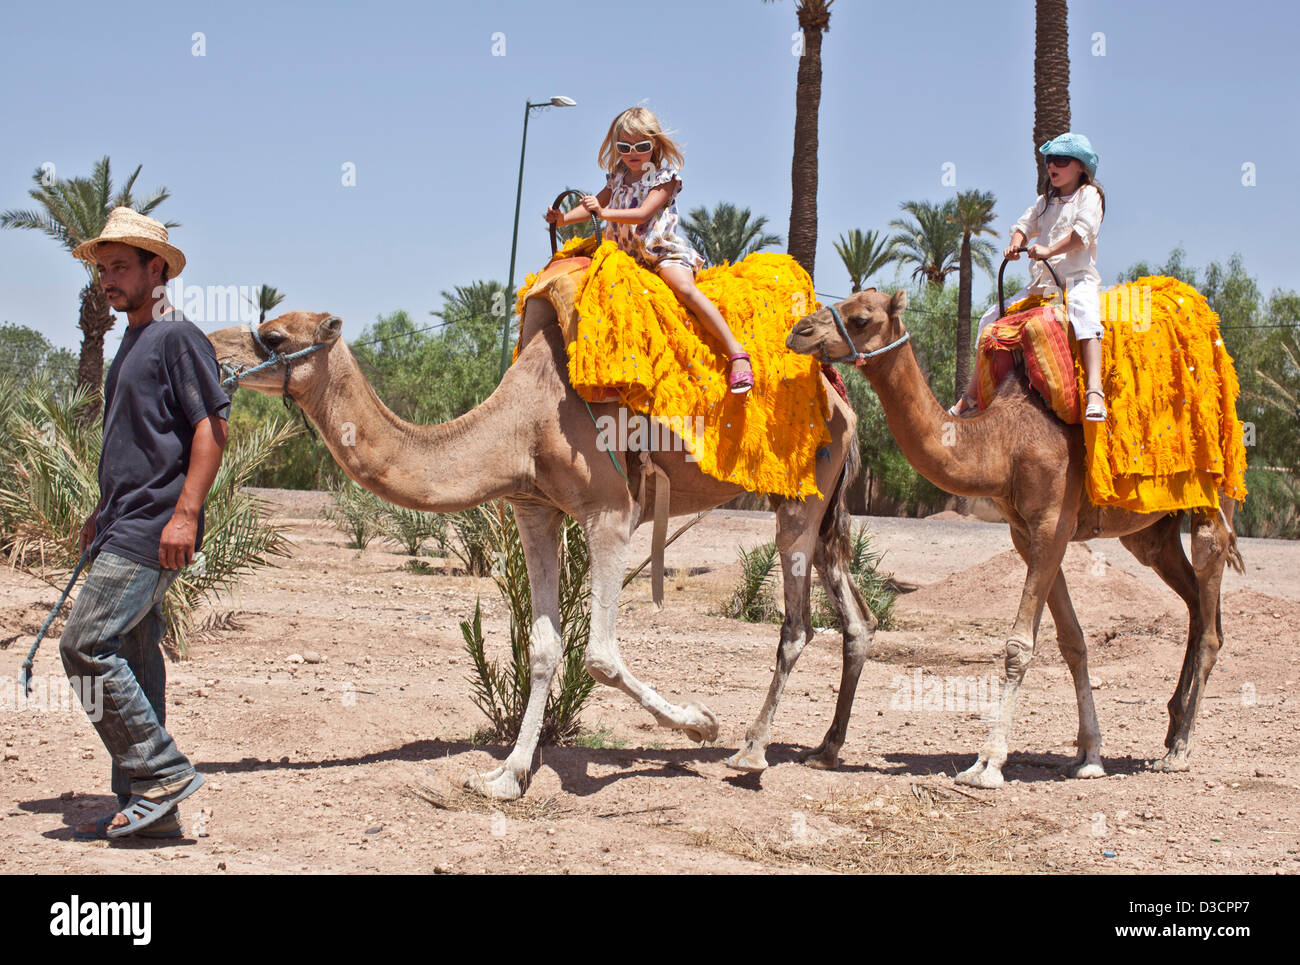 Girls riding camels, Marrakech, Morocco Stock Photo